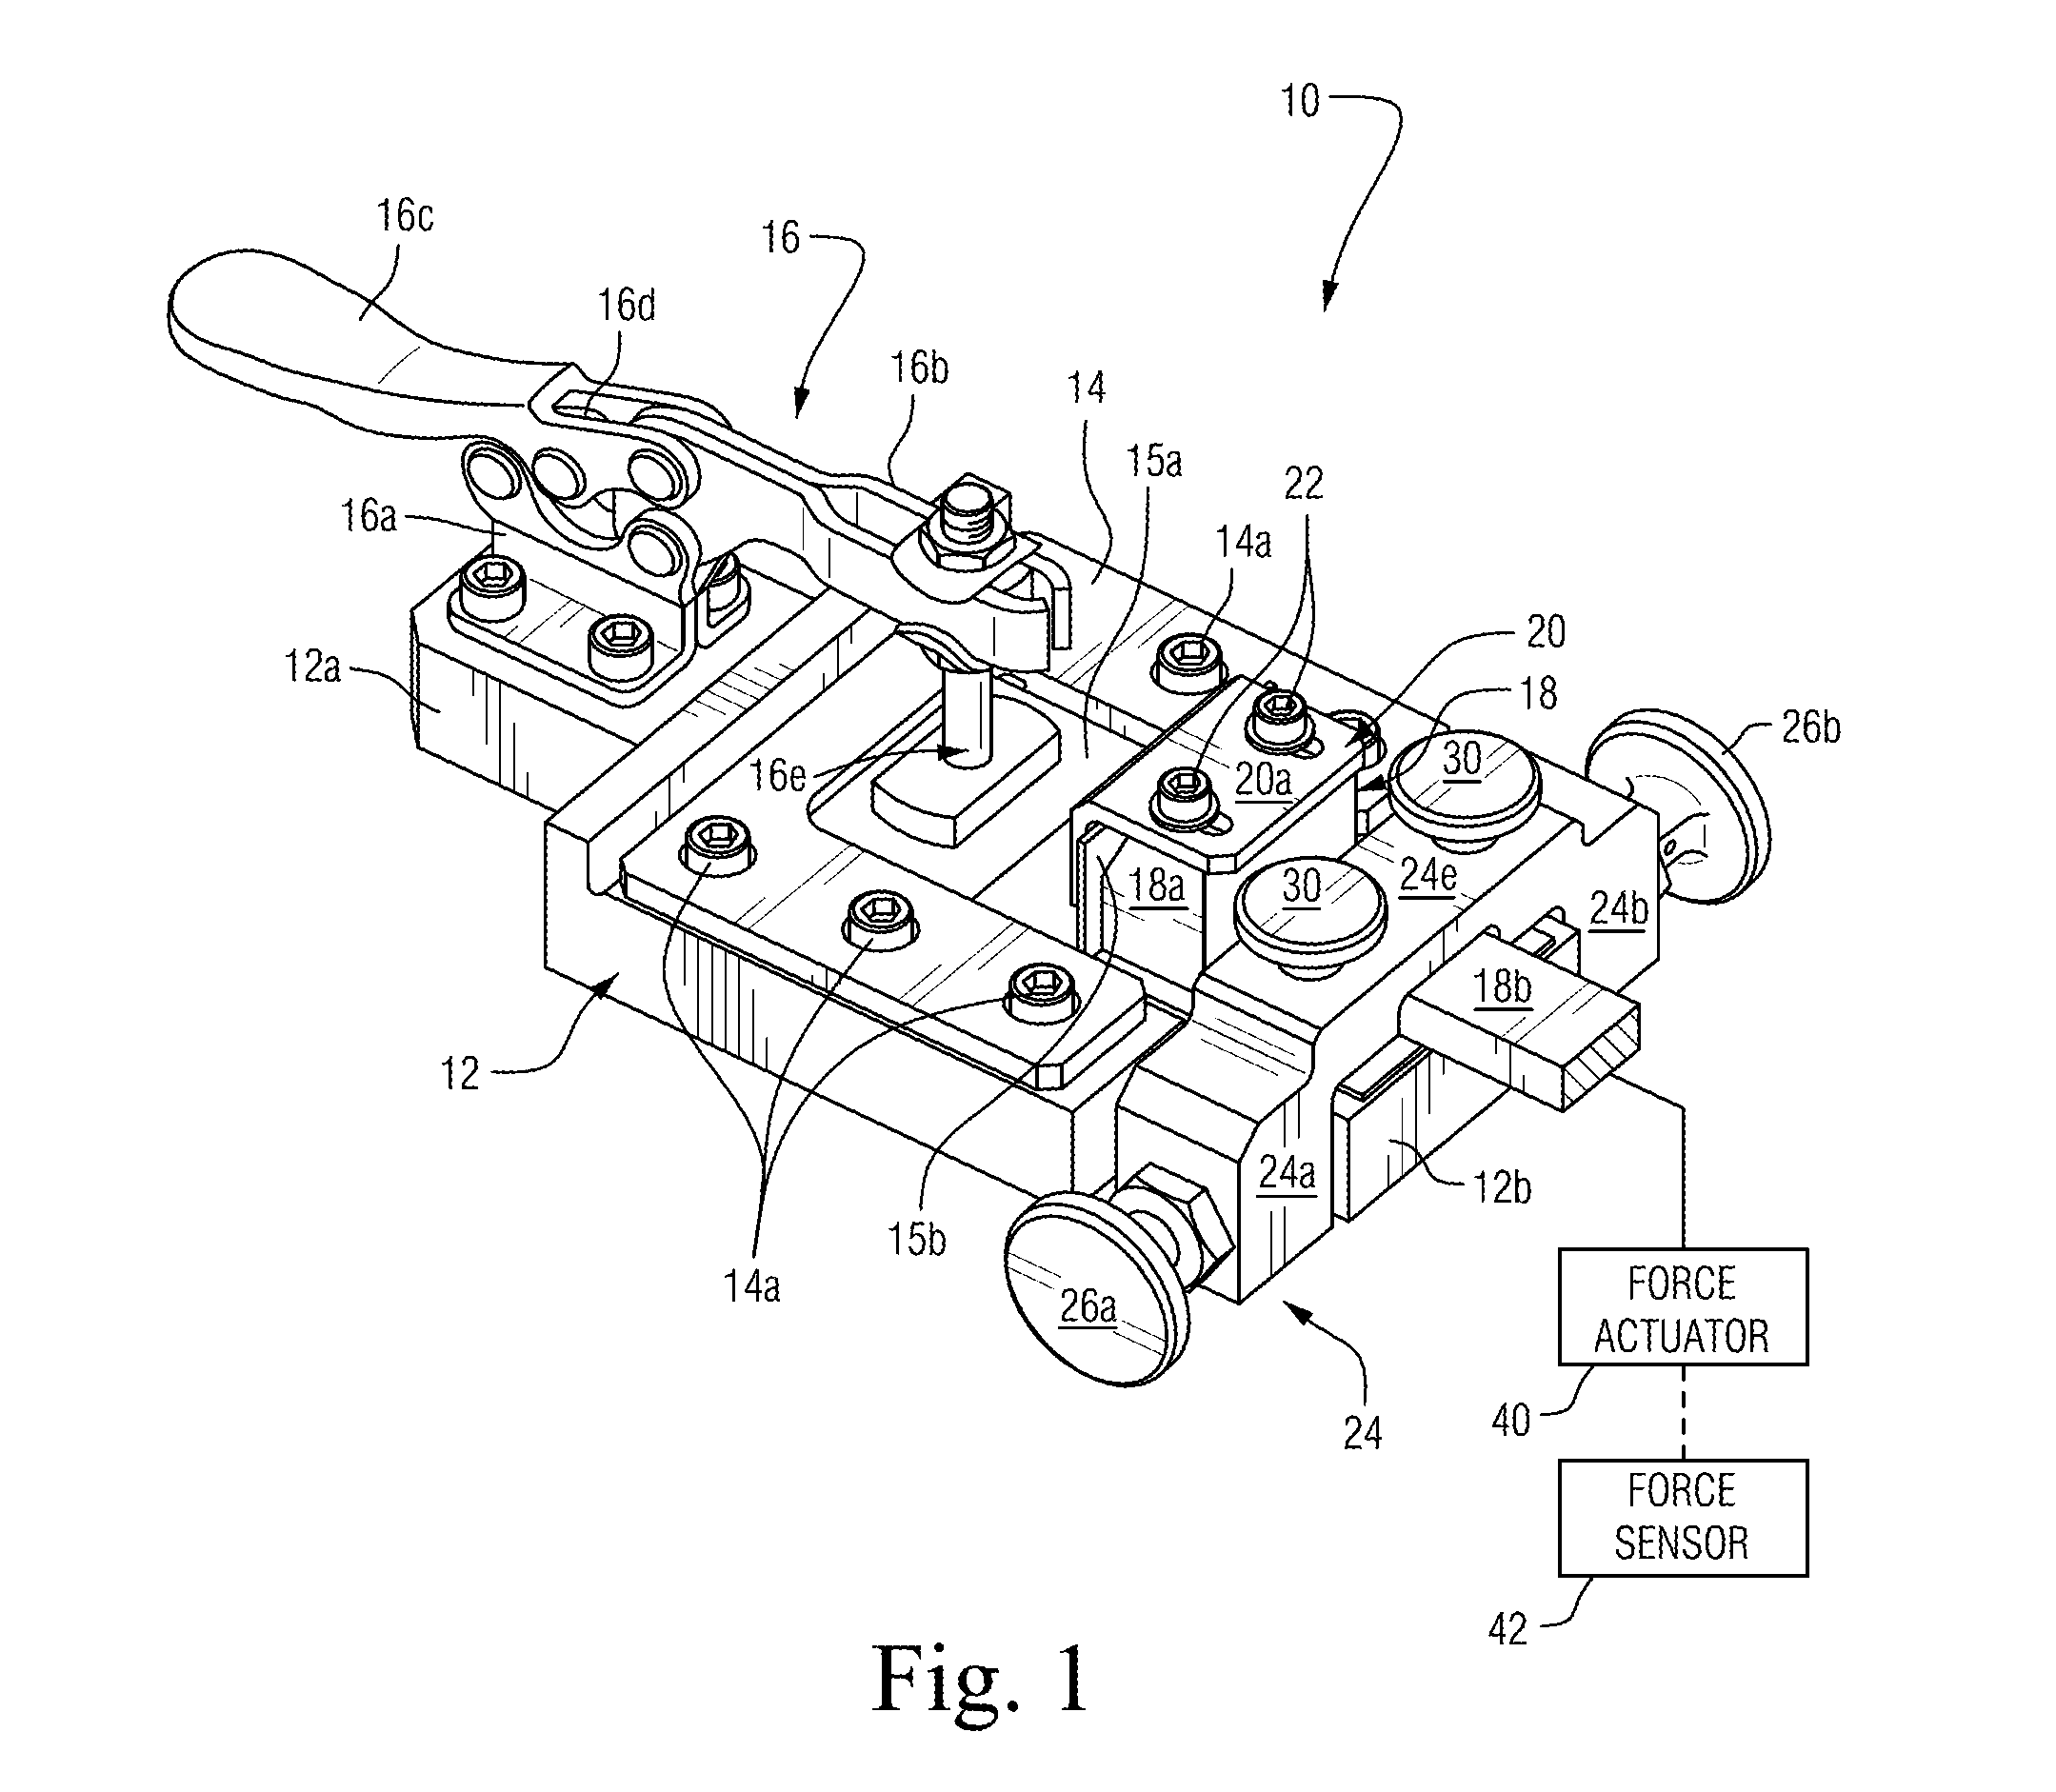 Device and methods for testing quality of welding joints